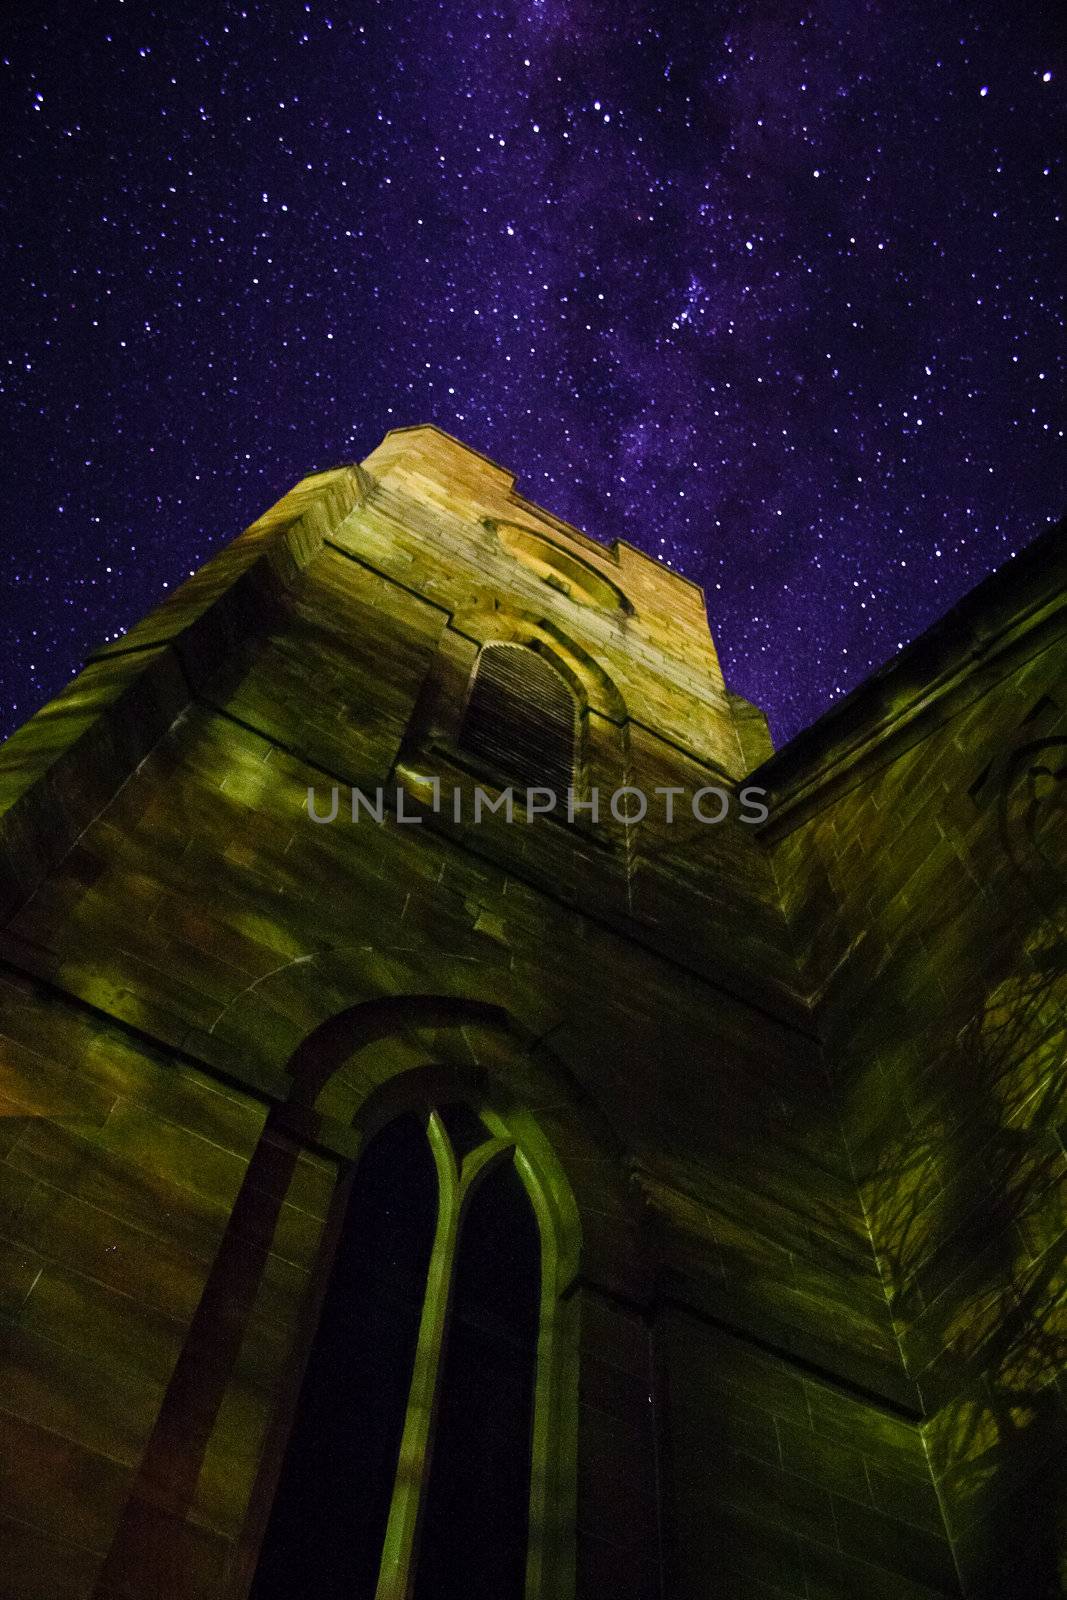 Low angle view of a stone church tower with decorative windows reaching up towards a starry night sky